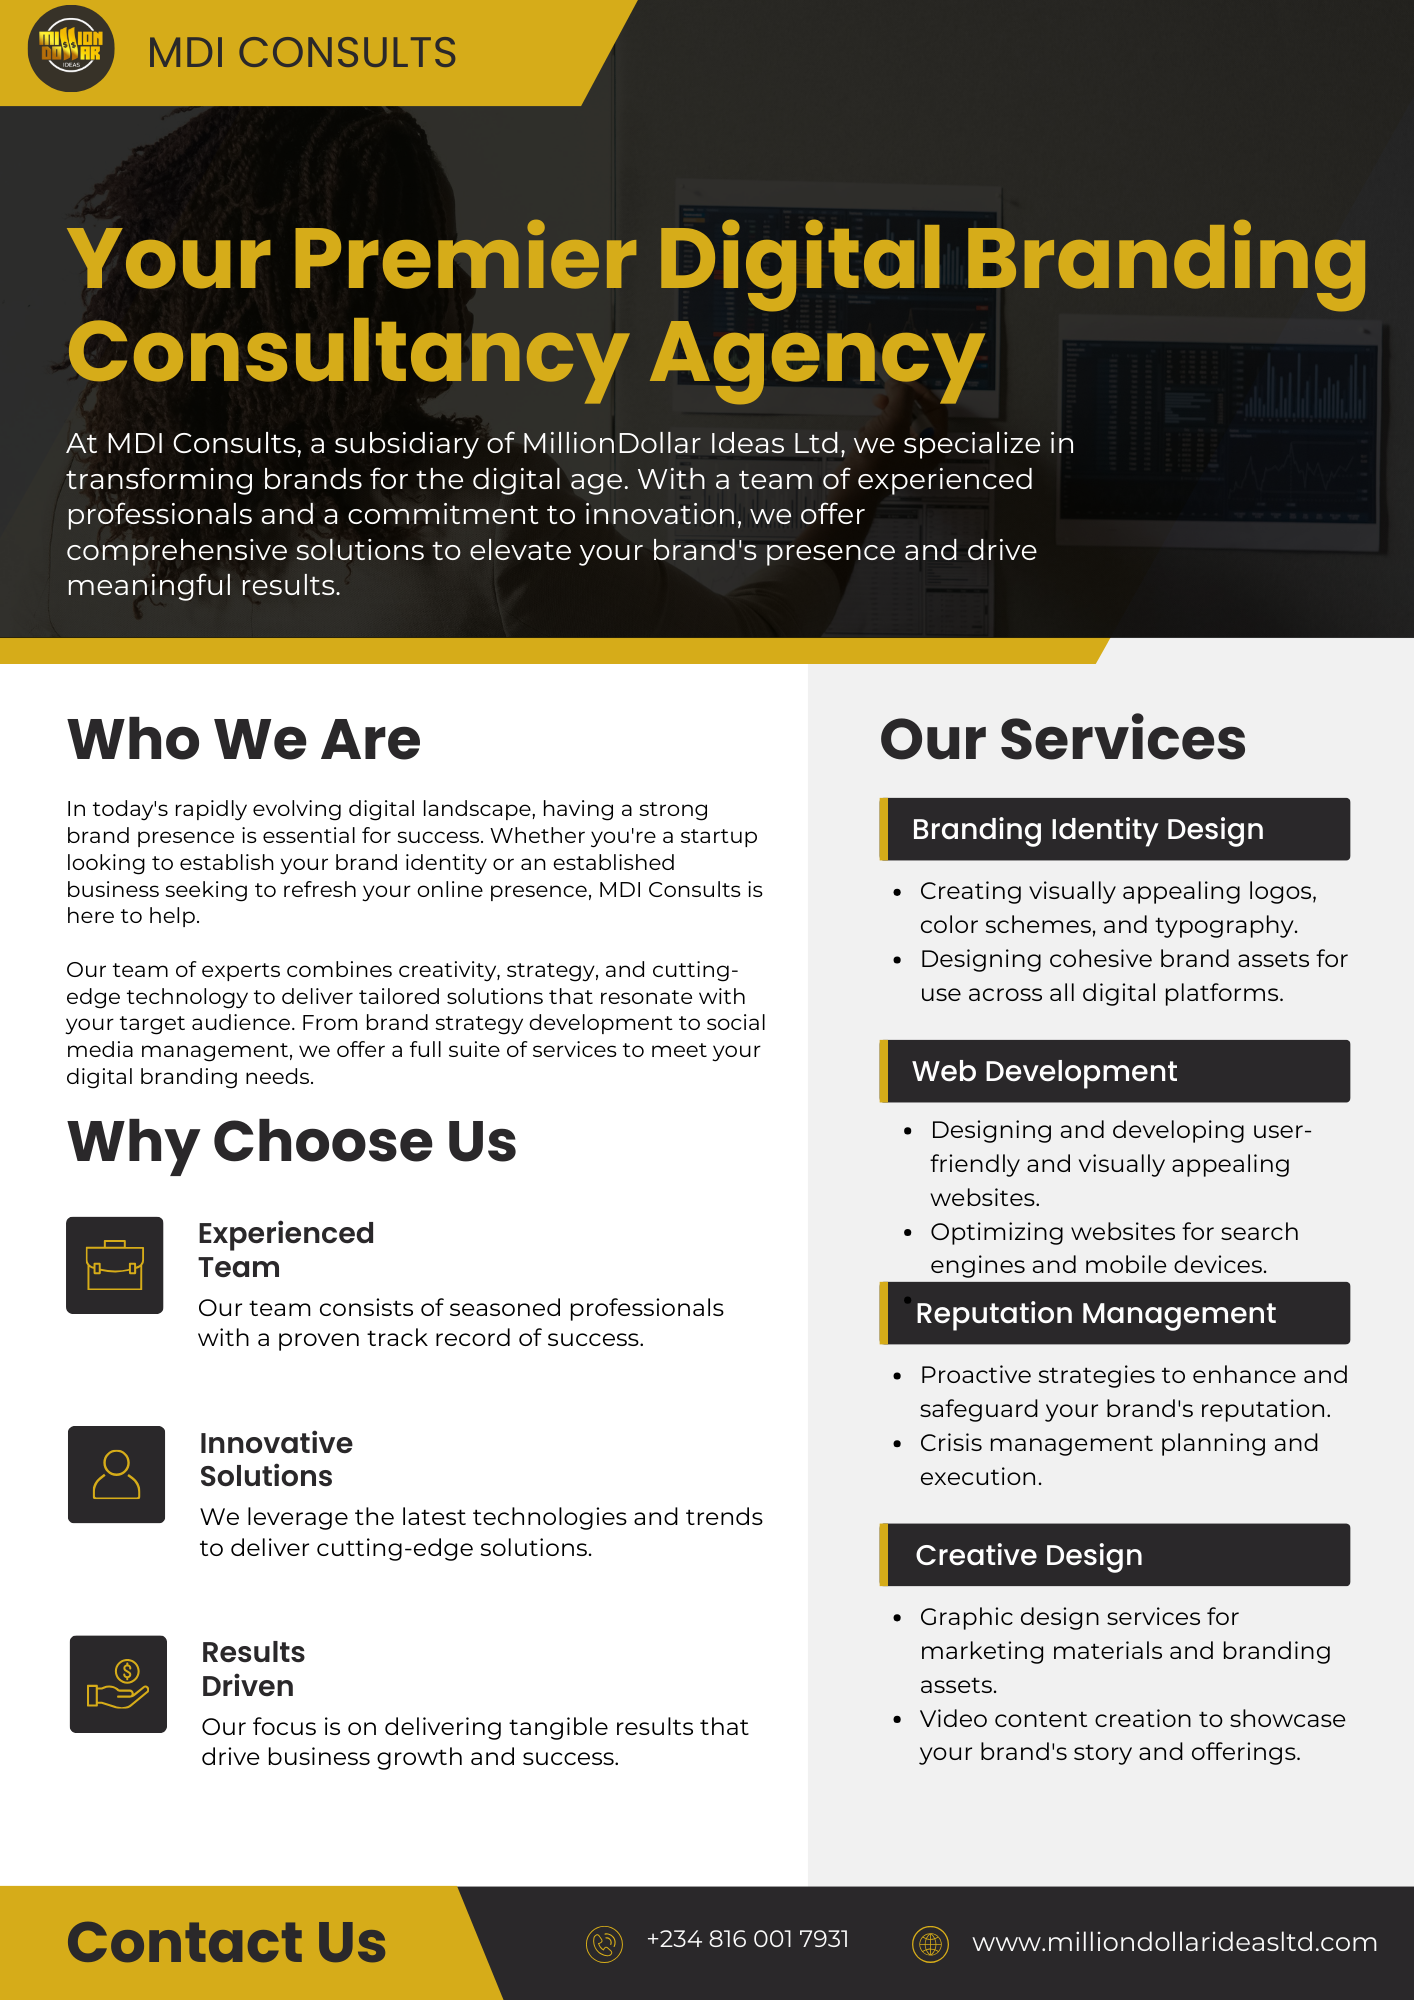 Introducing MDI Consults: Your Premier Digital Branding Consultancy Agency